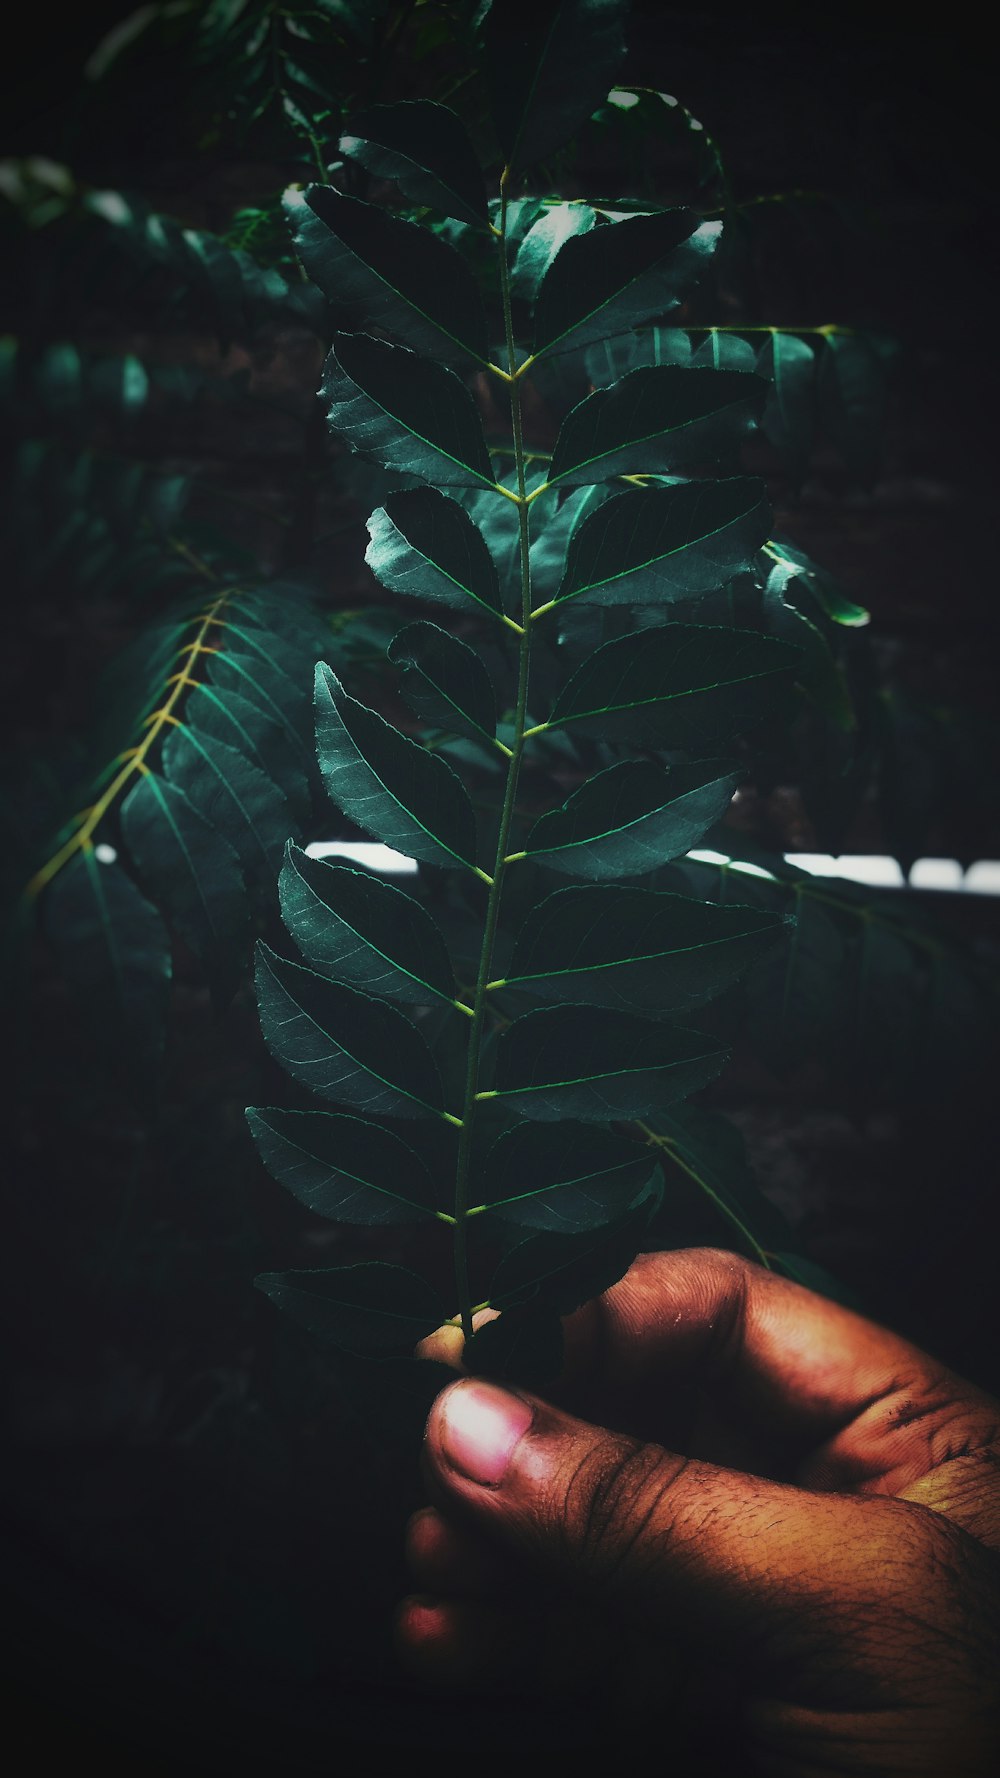 person holding green leaves during daytime